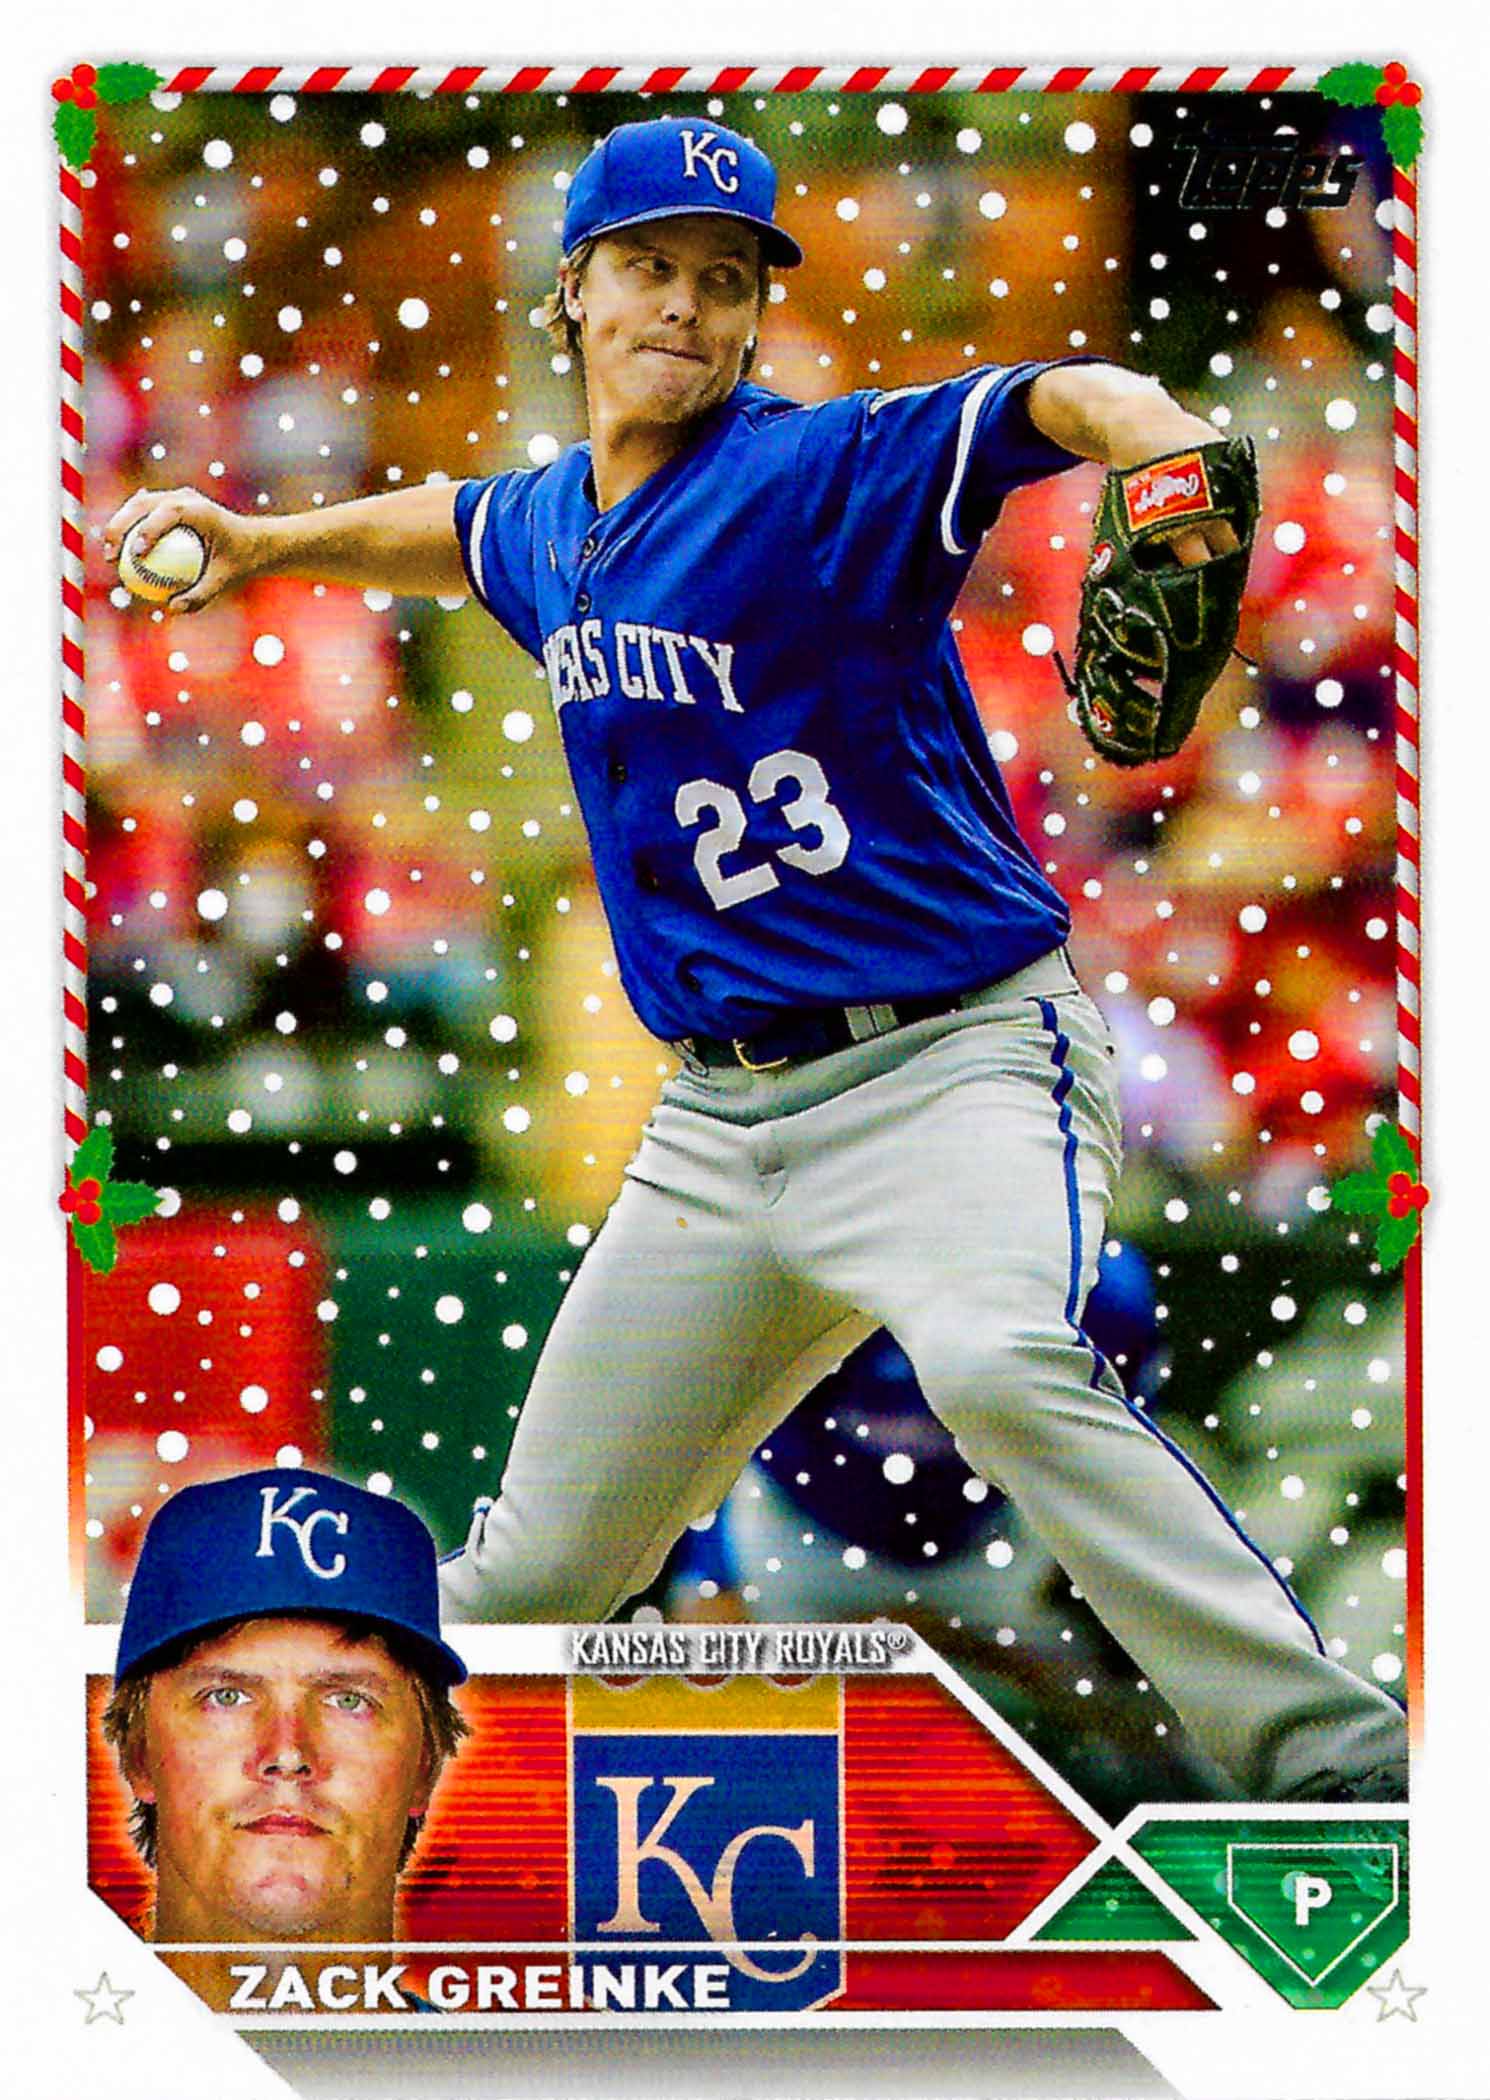 2023 Topps Holiday